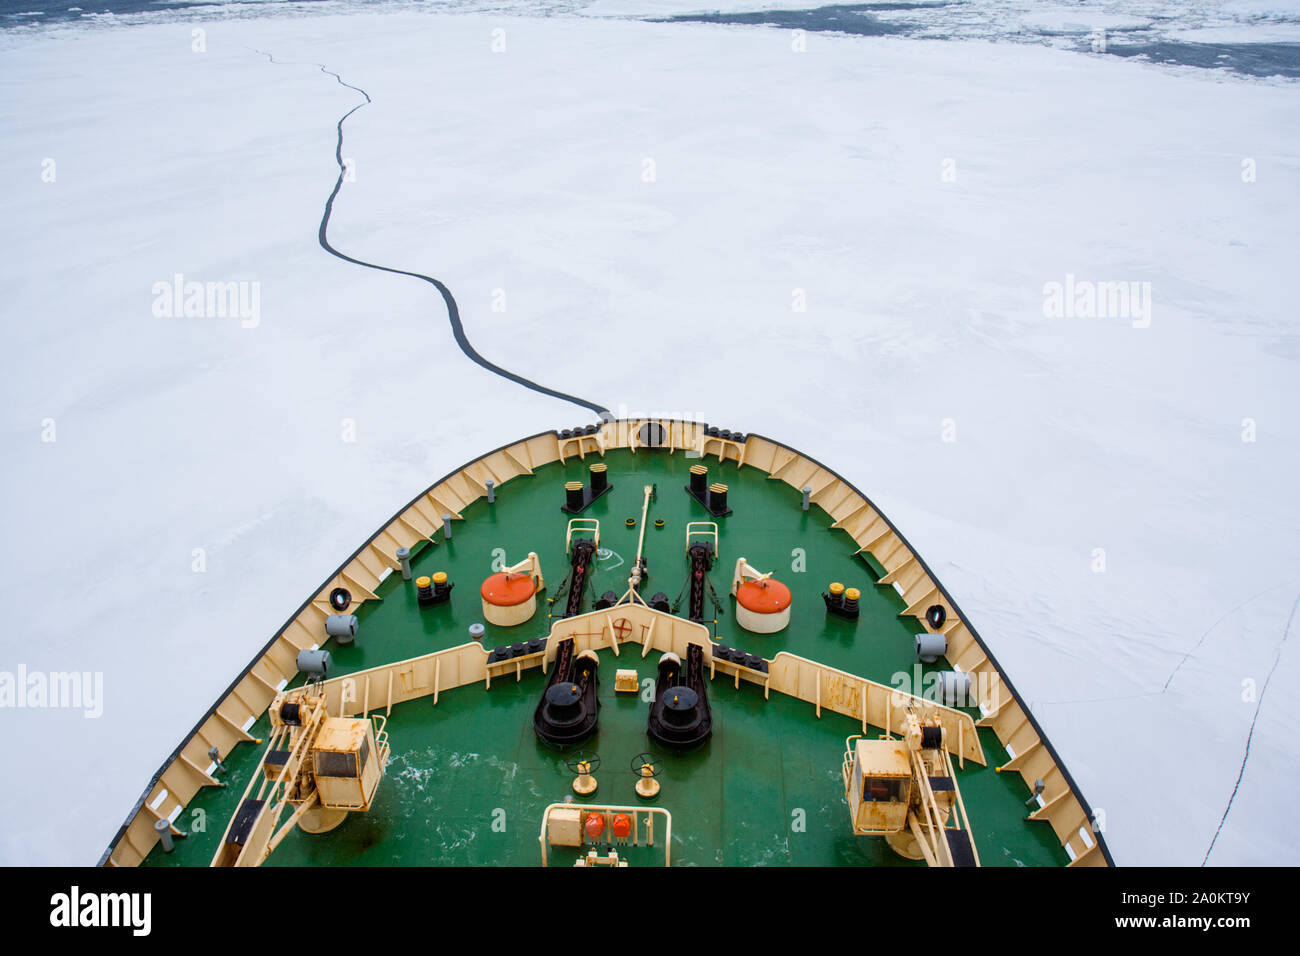 Prow of the Icebreaker Kapitan Khlebnikov cutting through sea ice and floes en route to the Weddell Sea, Antarctica Stock Photo